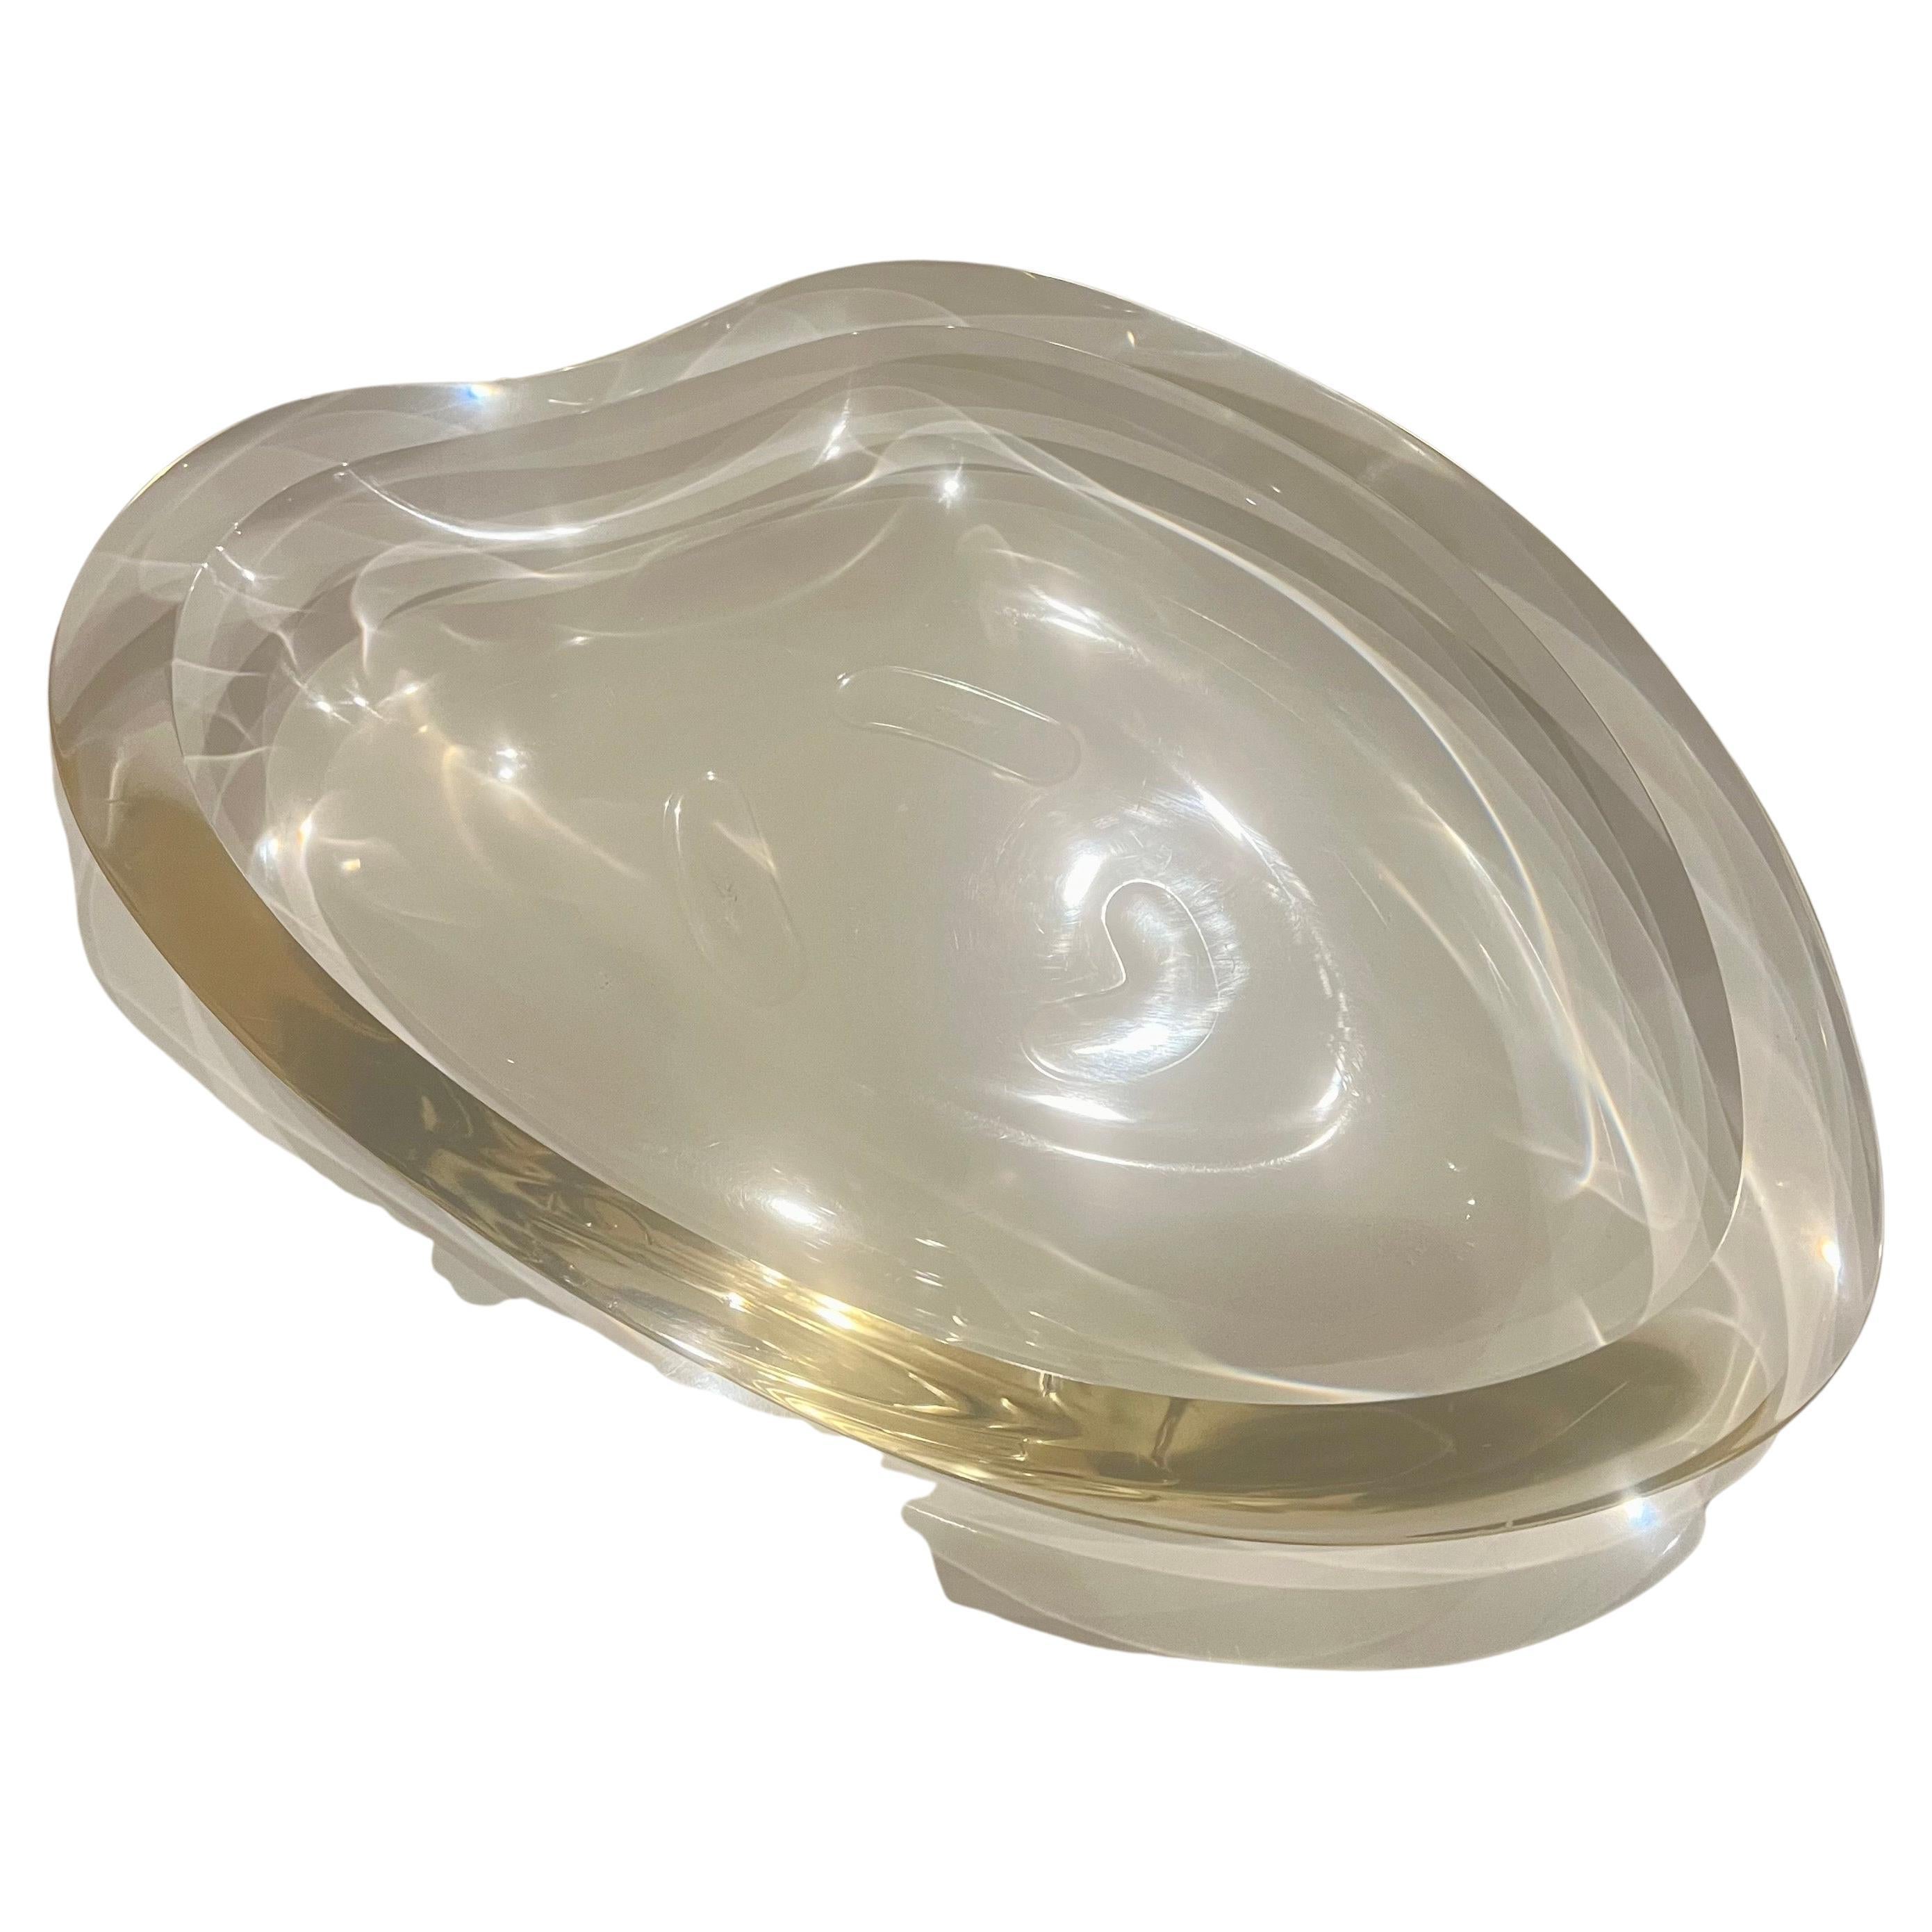 Majestic Thick solid lucite freeform large bowl circa 1970's we have polished the piece looks spectacular with 1.25